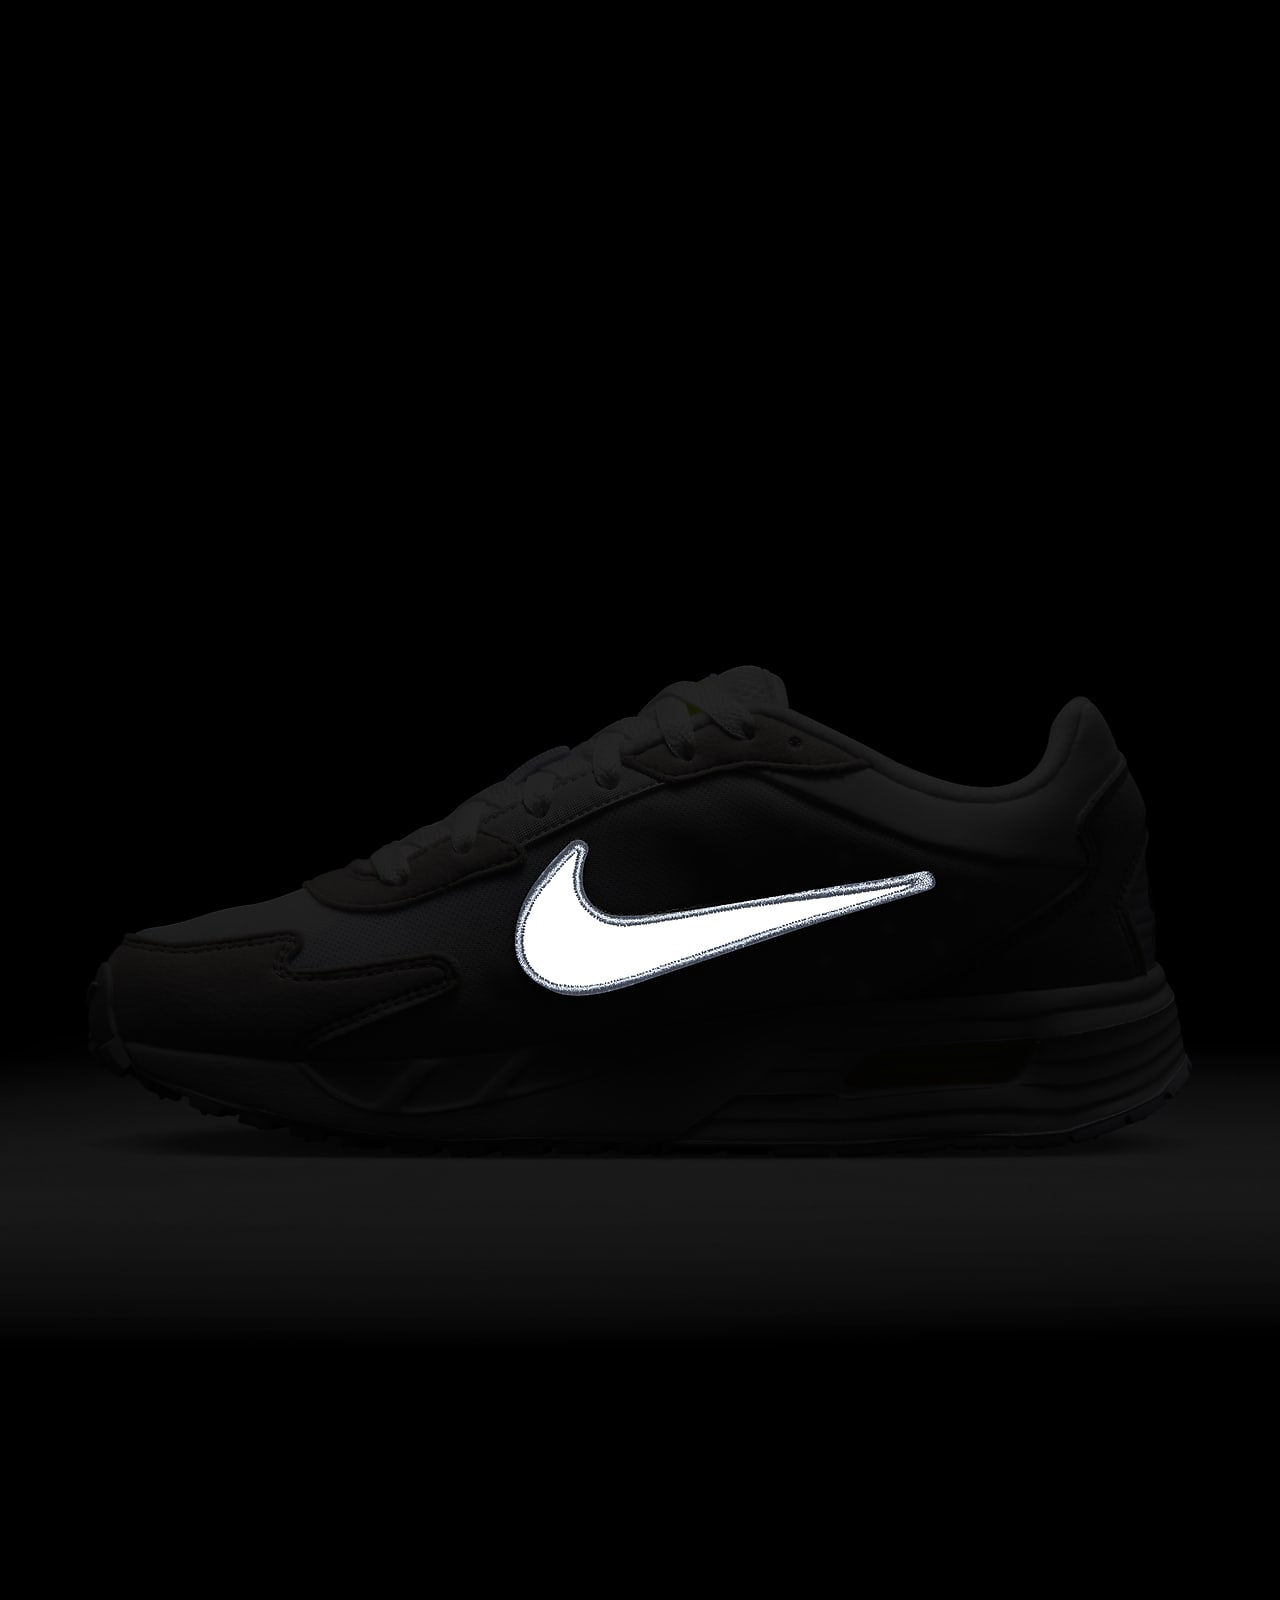 Air Max Solo Women's Shoes. ID